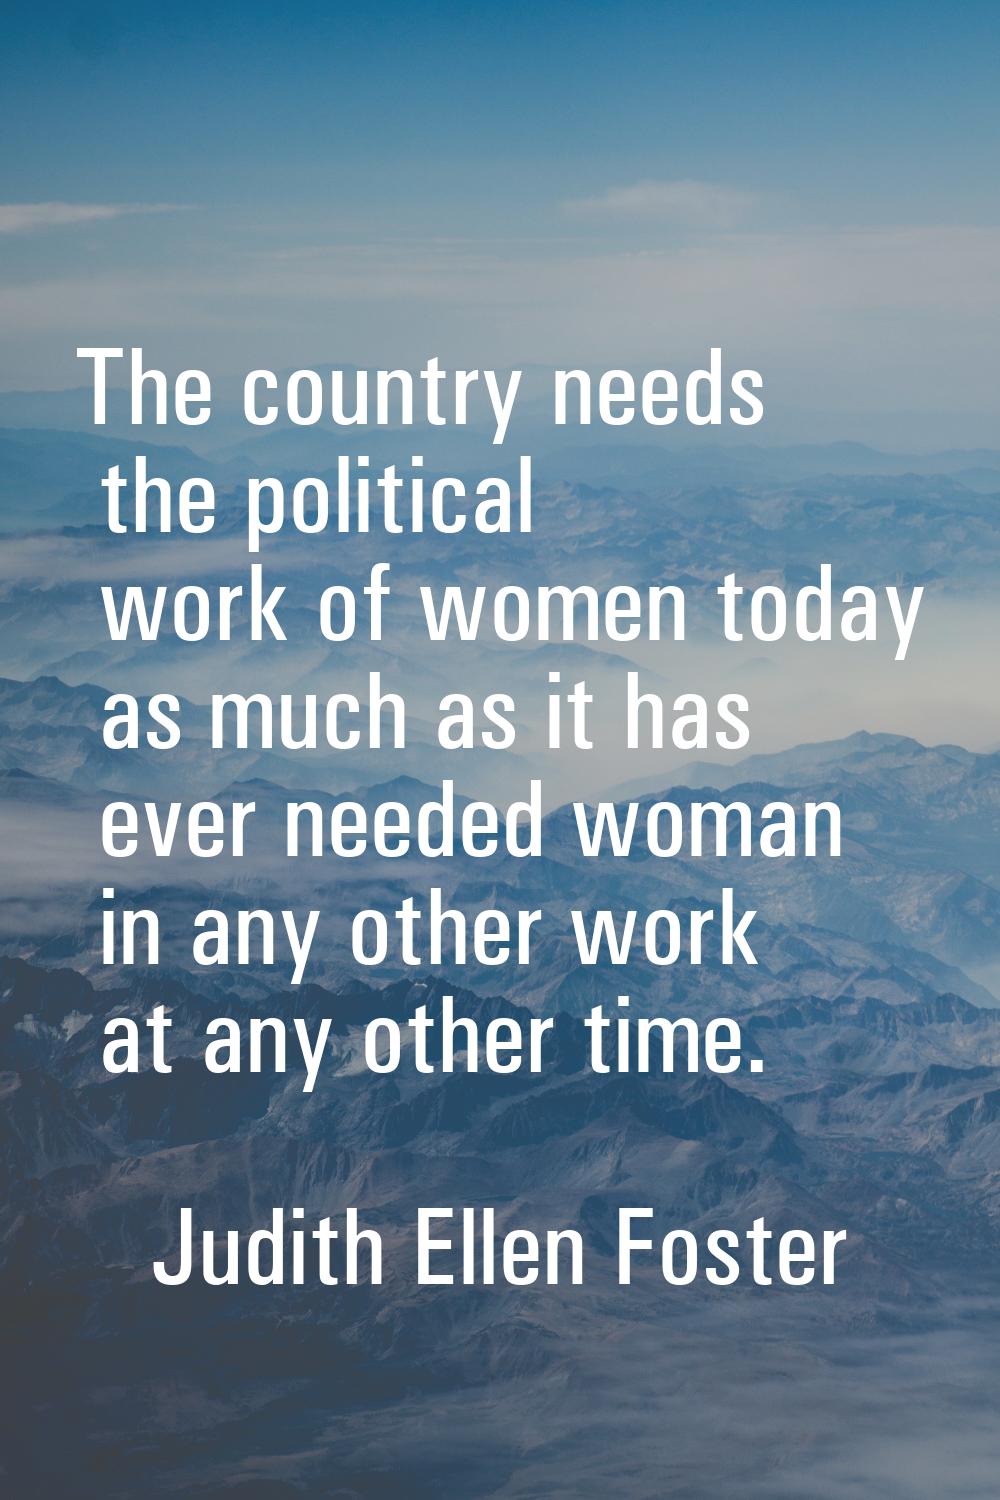 The country needs the political work of women today as much as it has ever needed woman in any othe